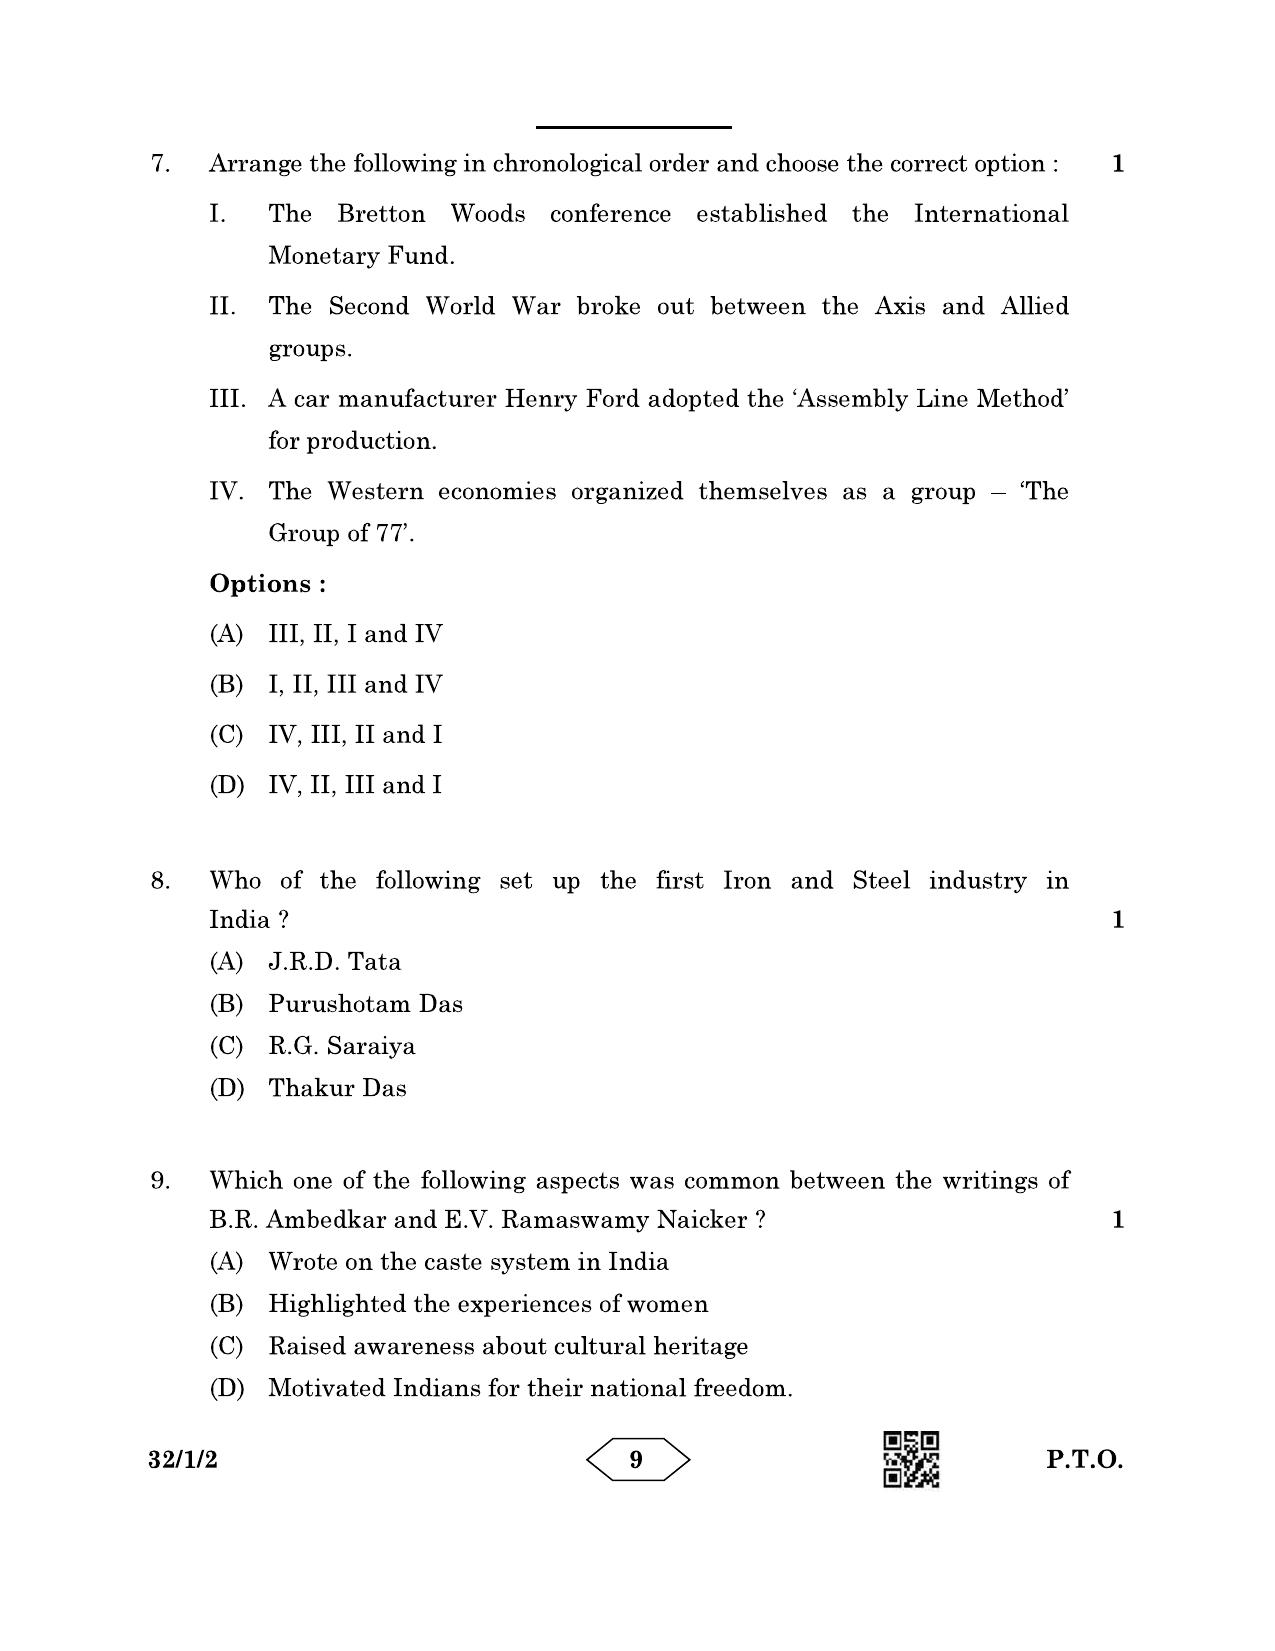 CBSE Class 10 32-1-2 Social Science 2023 Question Paper - Page 9